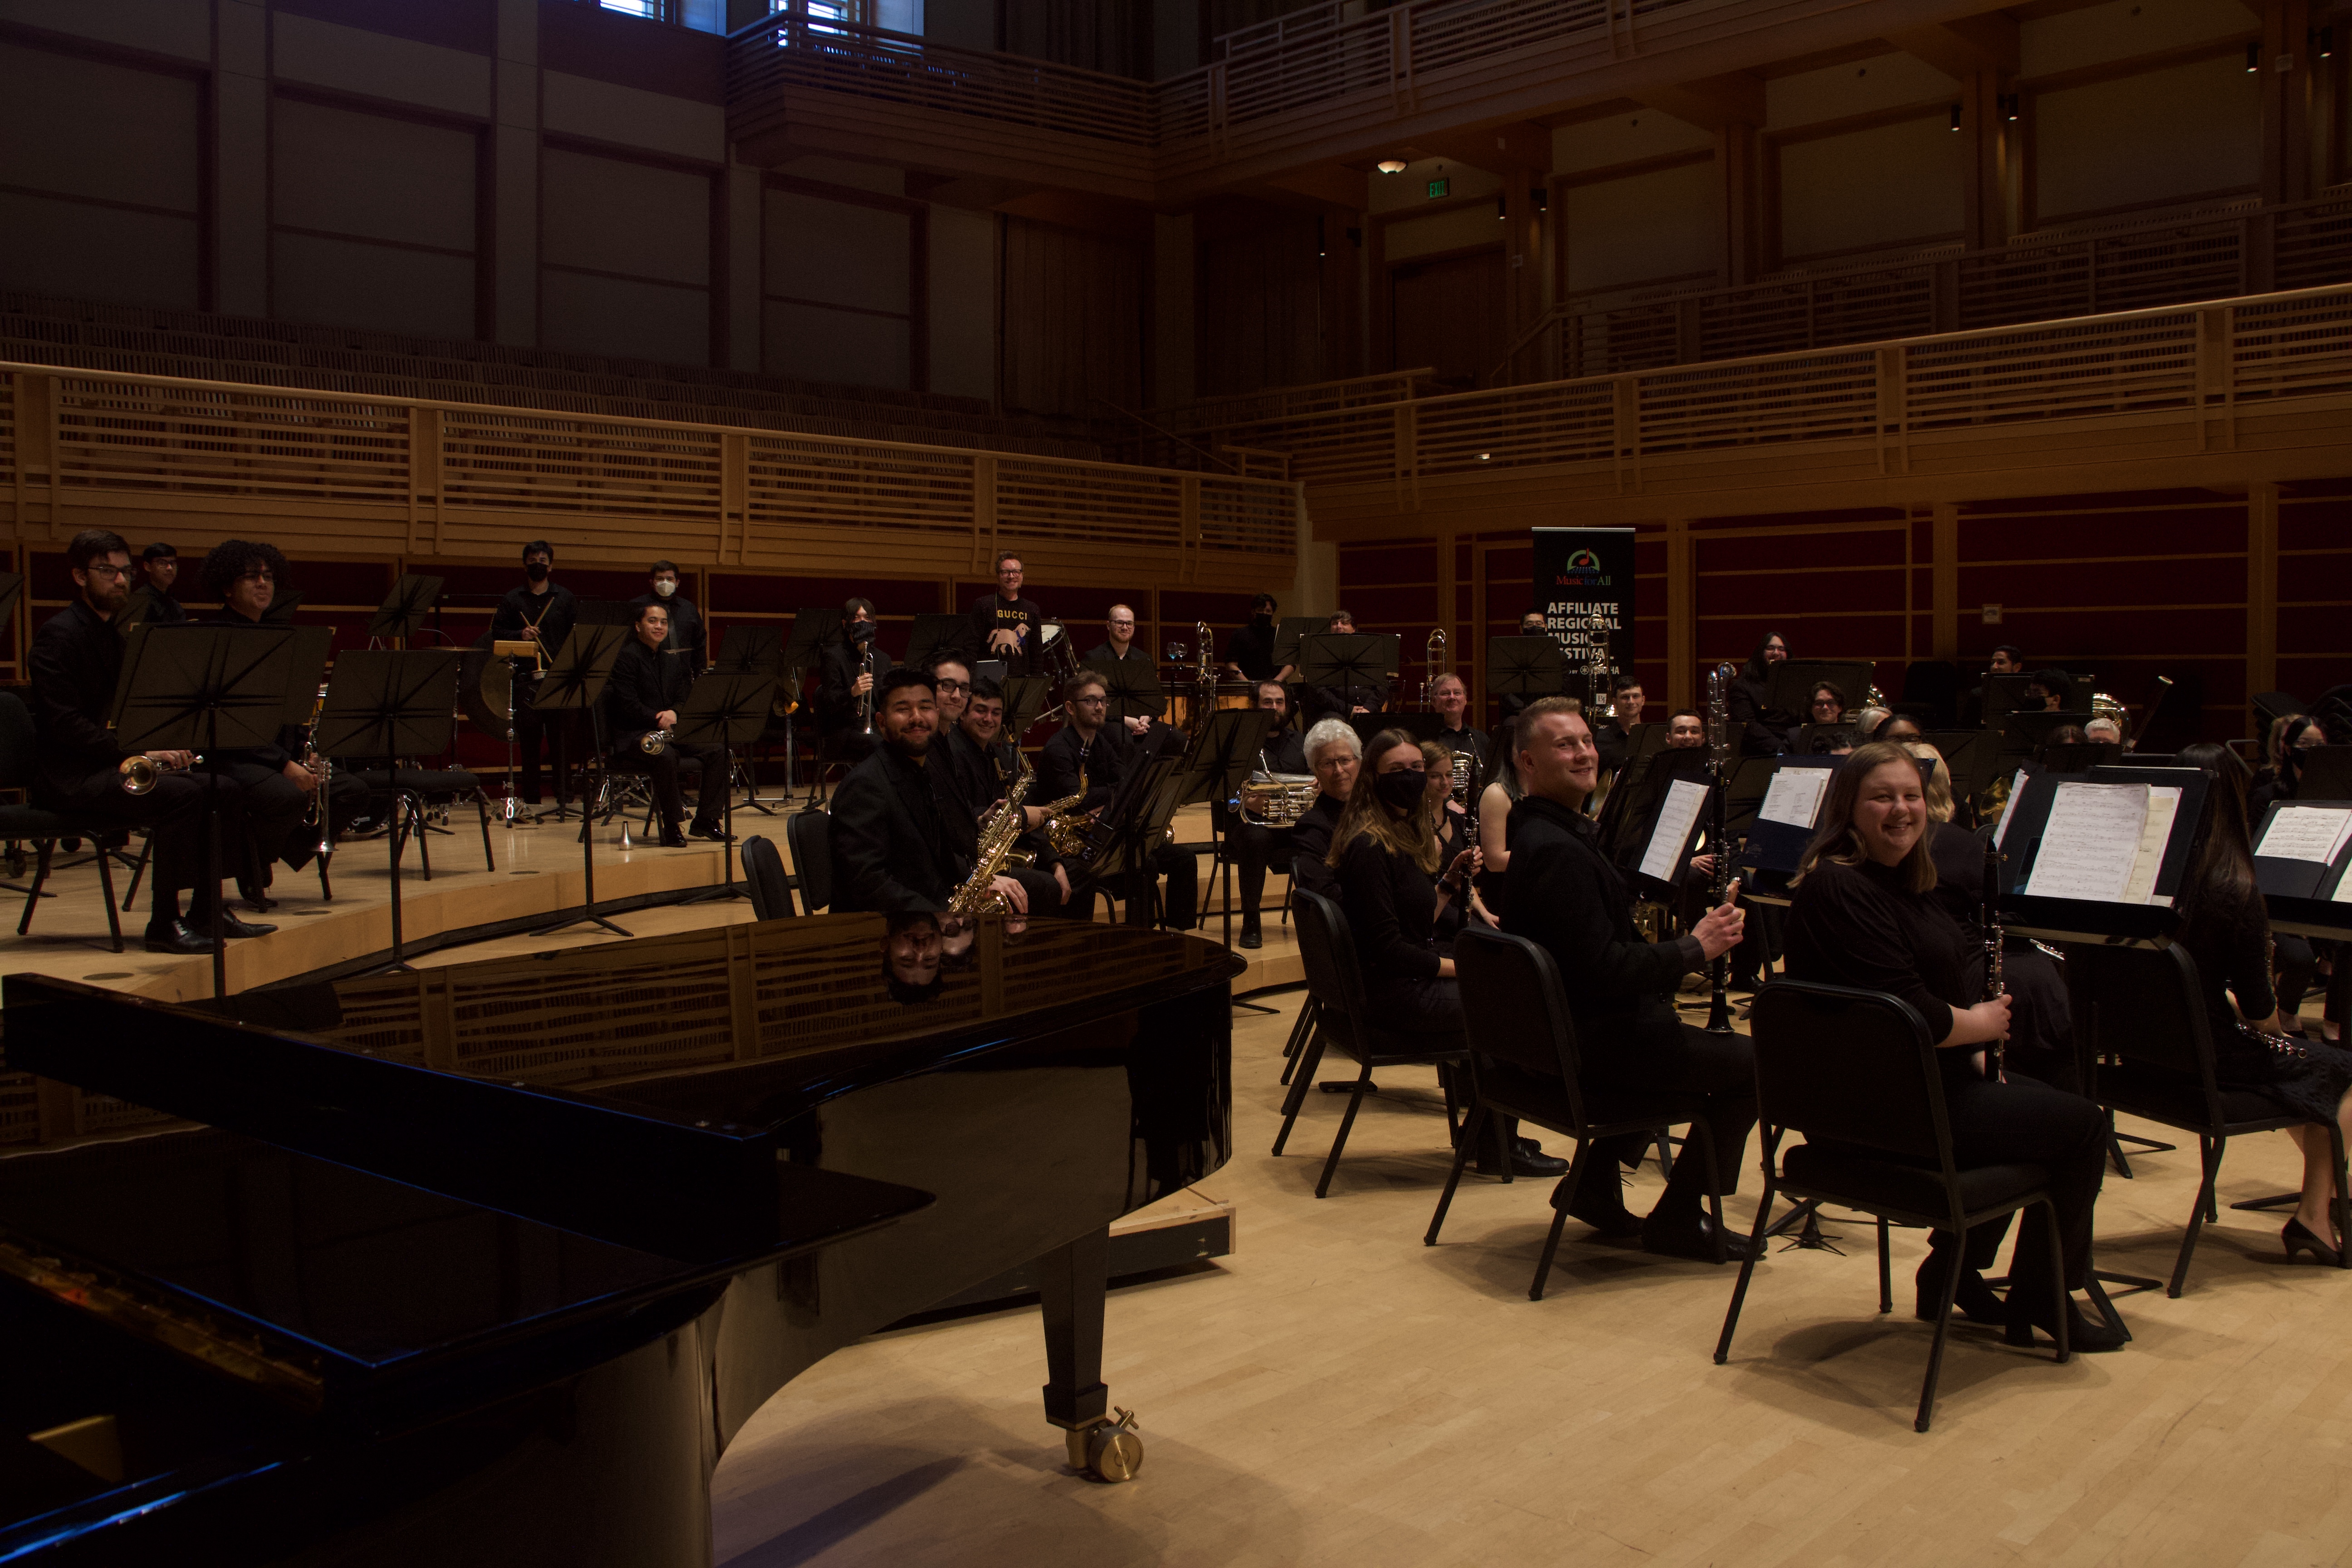 The Symphonic Wind Ensemble seated, posing and smiling on stage with John Mackey